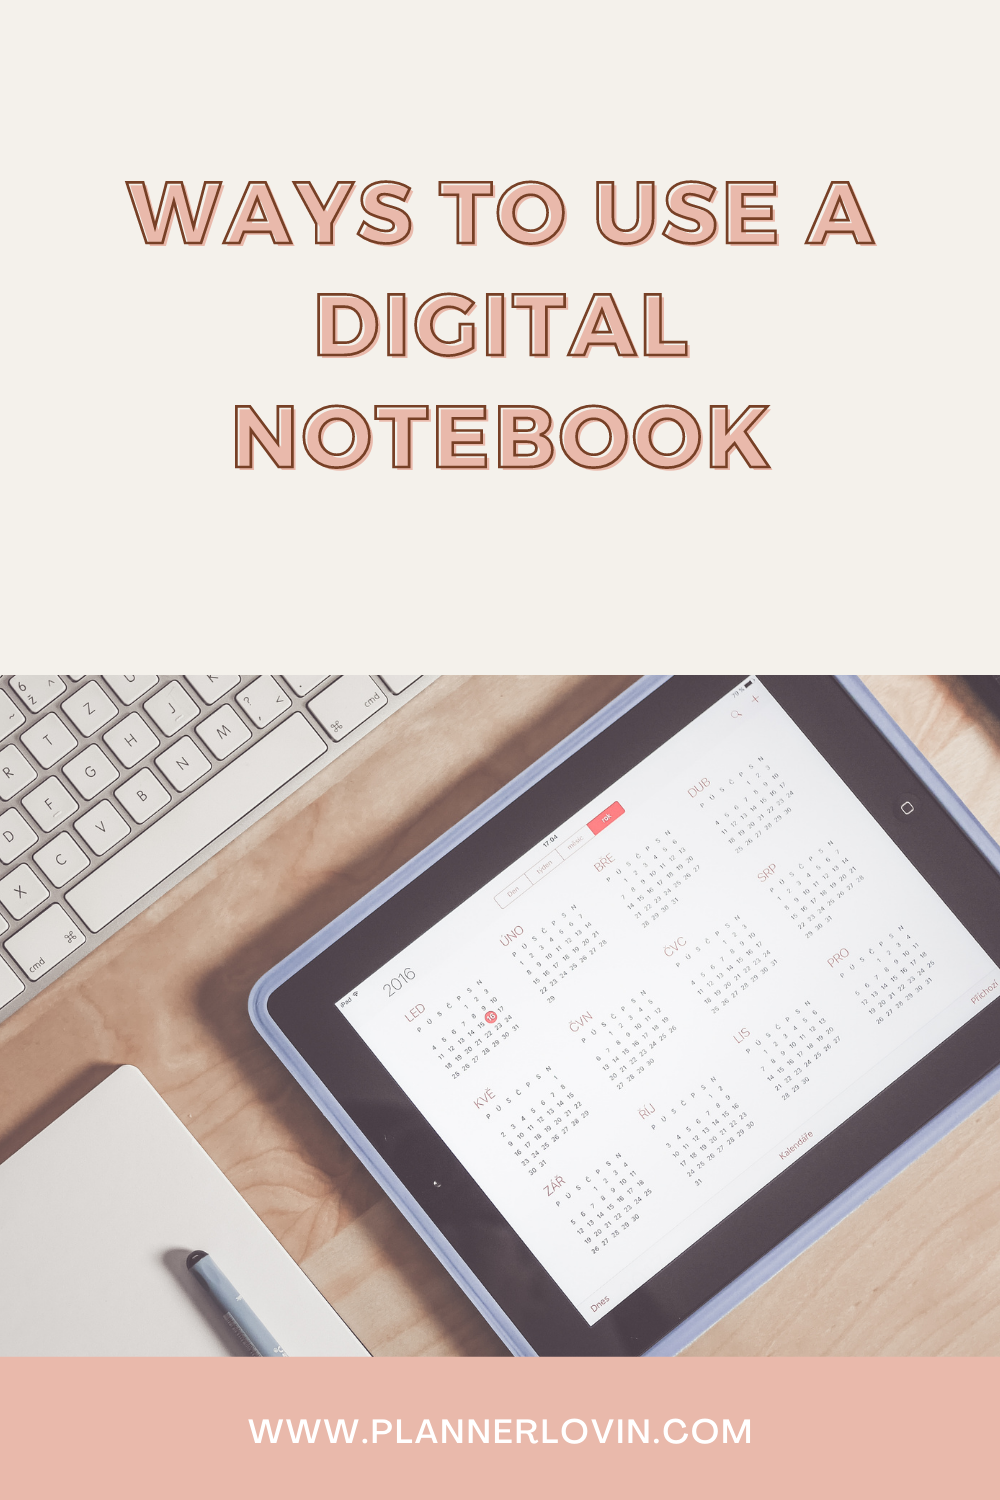 Ways to Use a Digital Notebook